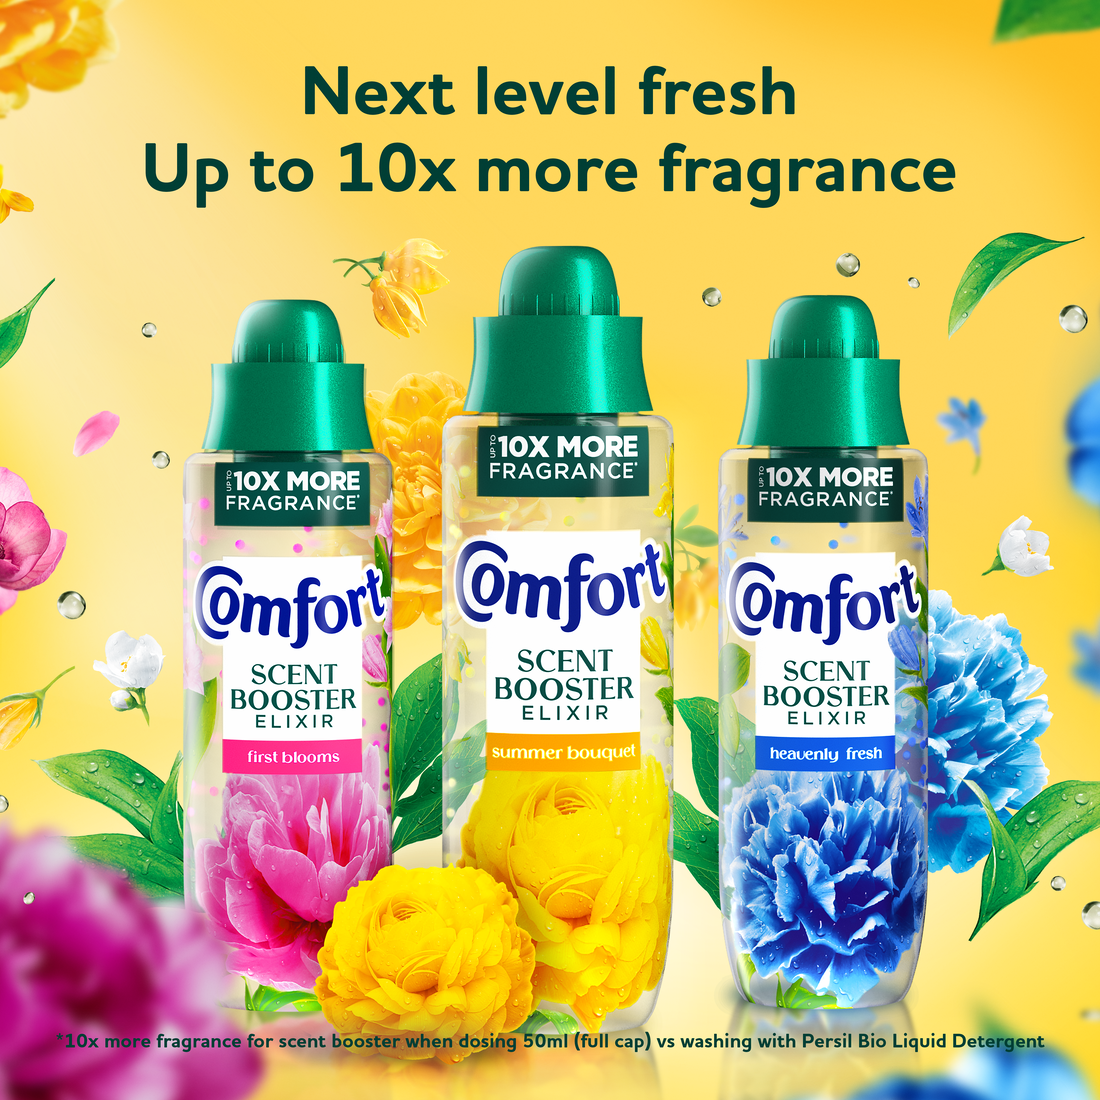 Next level fresh
Up to 10 times more fragrance

*10 times more fragrance for scent booster when dosing 50ml (full cap) vs washing with Persil Bio Liquid Detergent